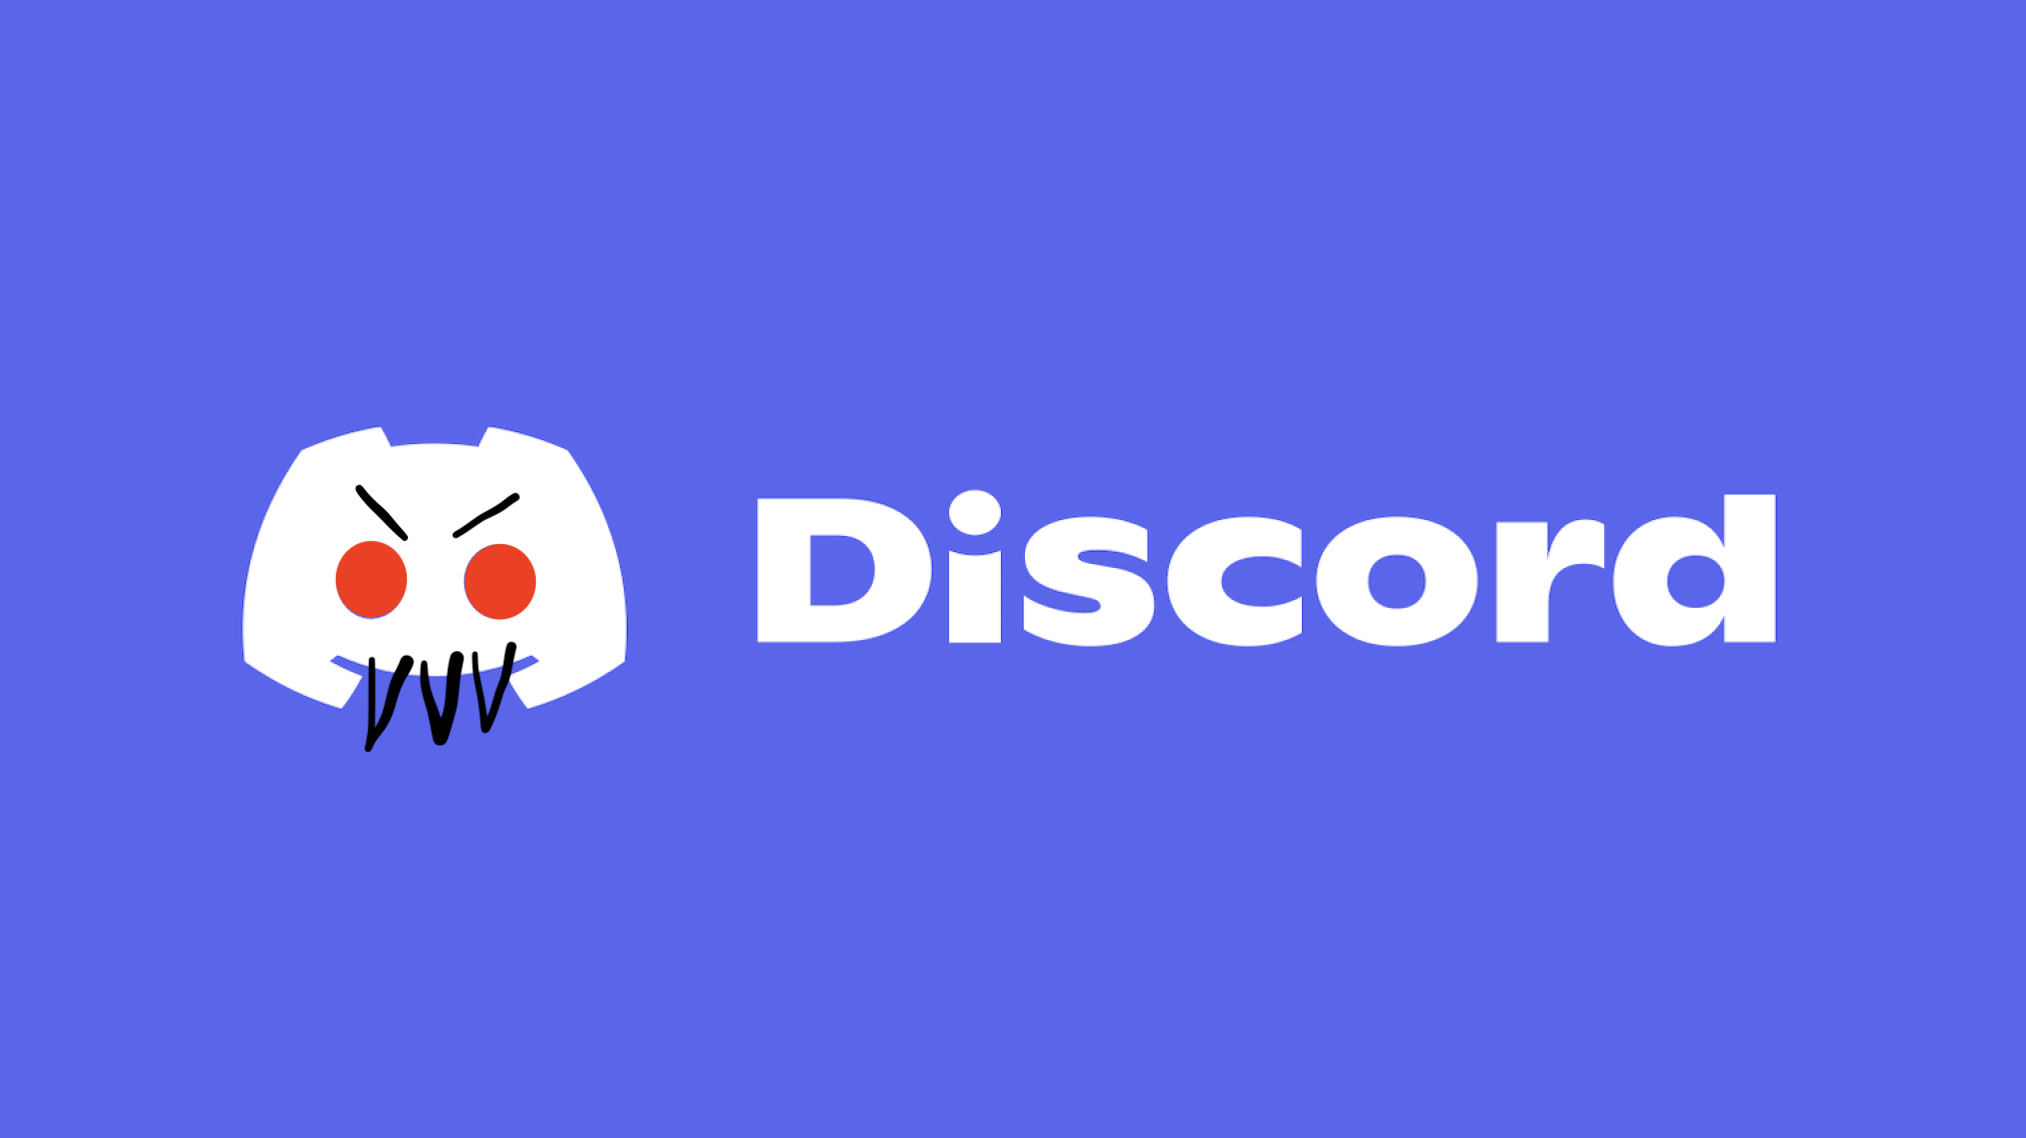 The Discord logo, with red eyes, angry eyebrows, and teeth added to the icon